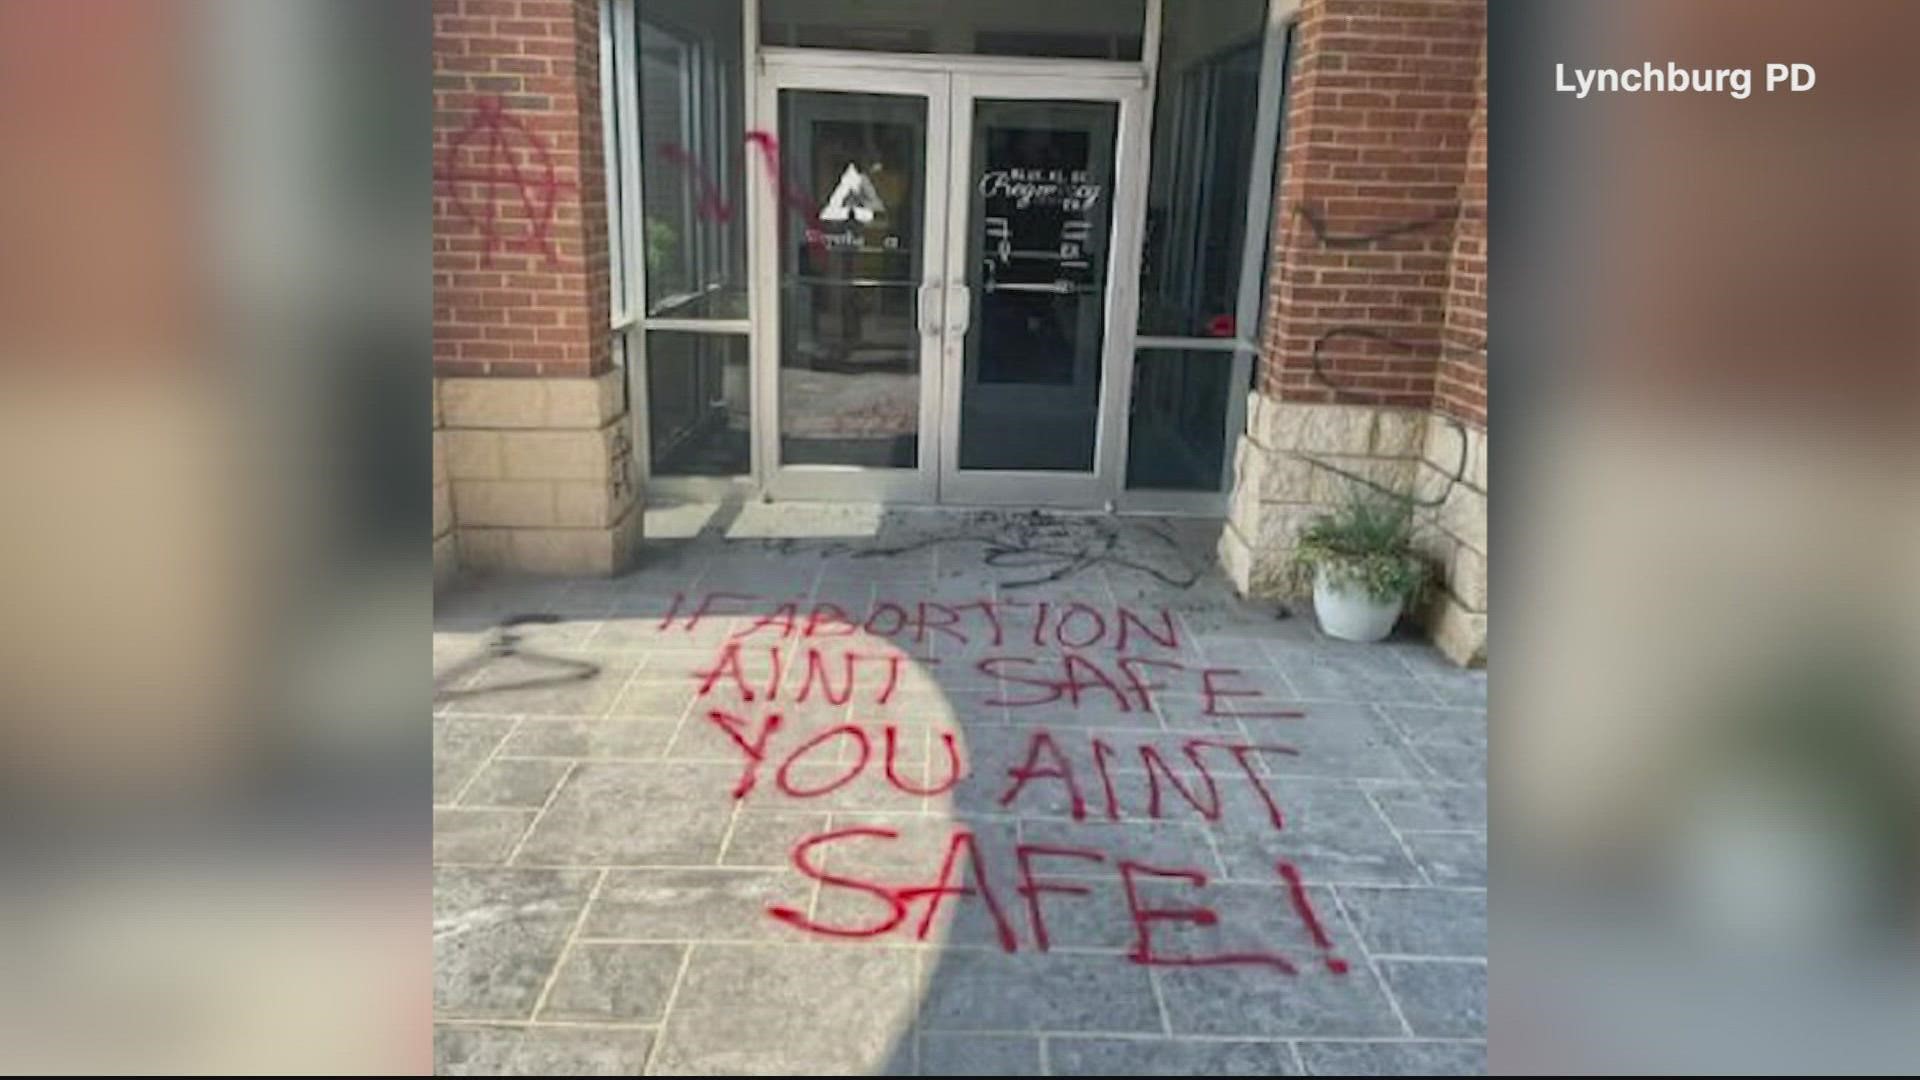 Police are investigating two separate incidents in Virginia after a church was set on fire and was defaced with graffiti. Then a pregnancy center was vandalized.